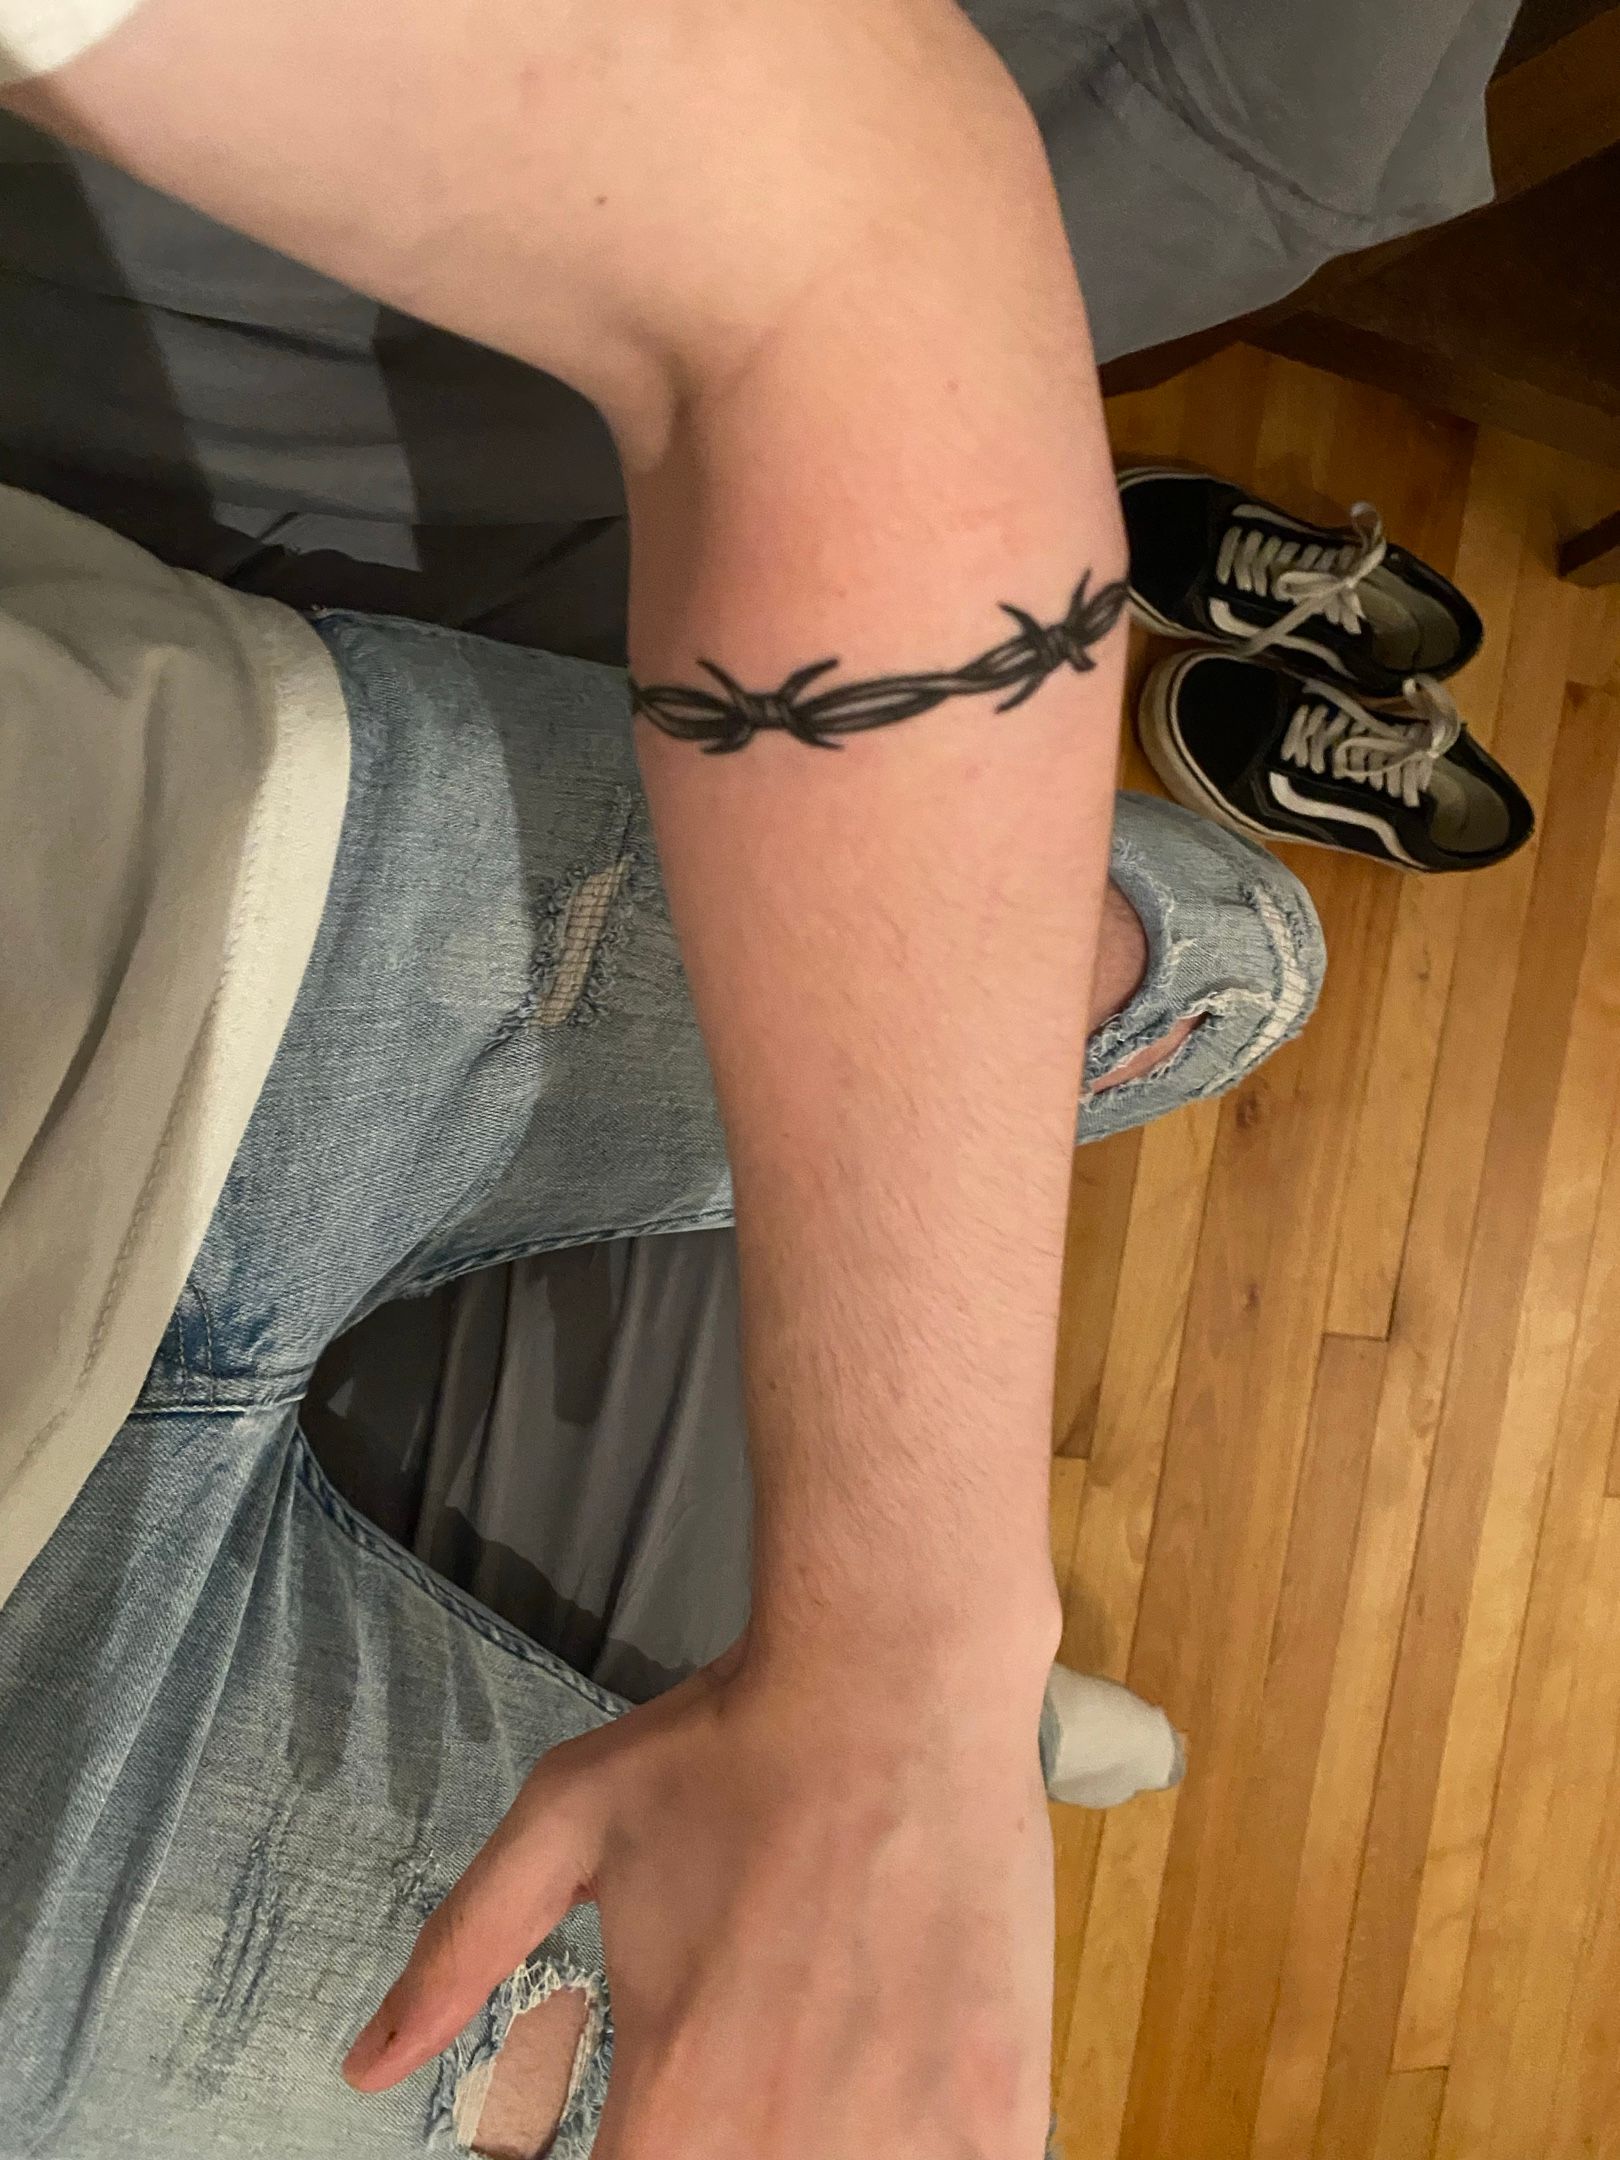 Tattoo uploaded by Xavier  Barbed wire finger tattoo by Indy Voet  IndyVoet line ring minimalist simple handpoke barbedwire  microtattoo  Tattoodo